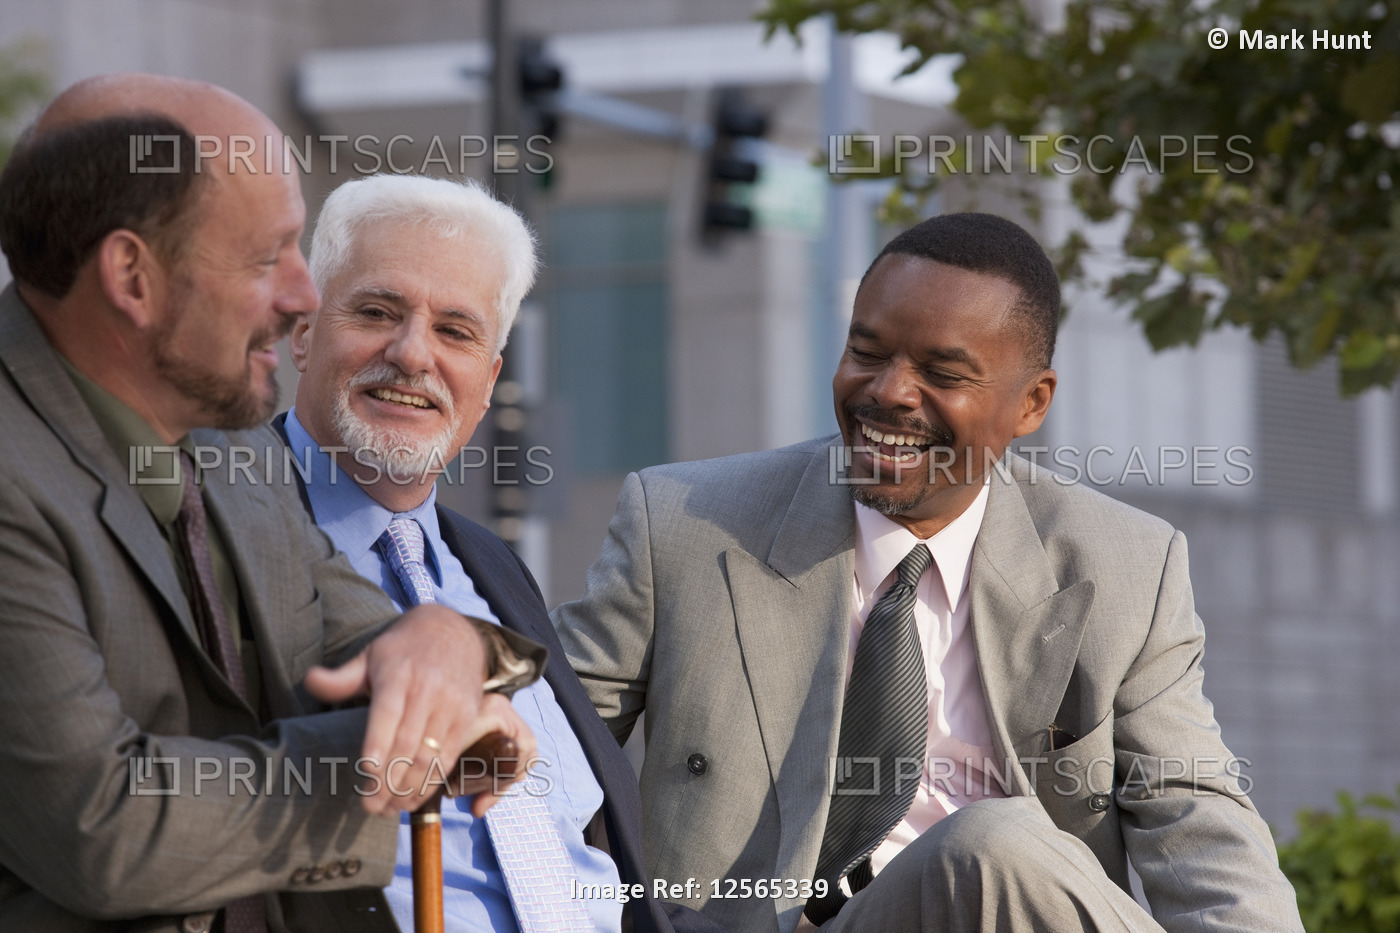 Businessmen talking and sharing insights, with one businessman holding a cane